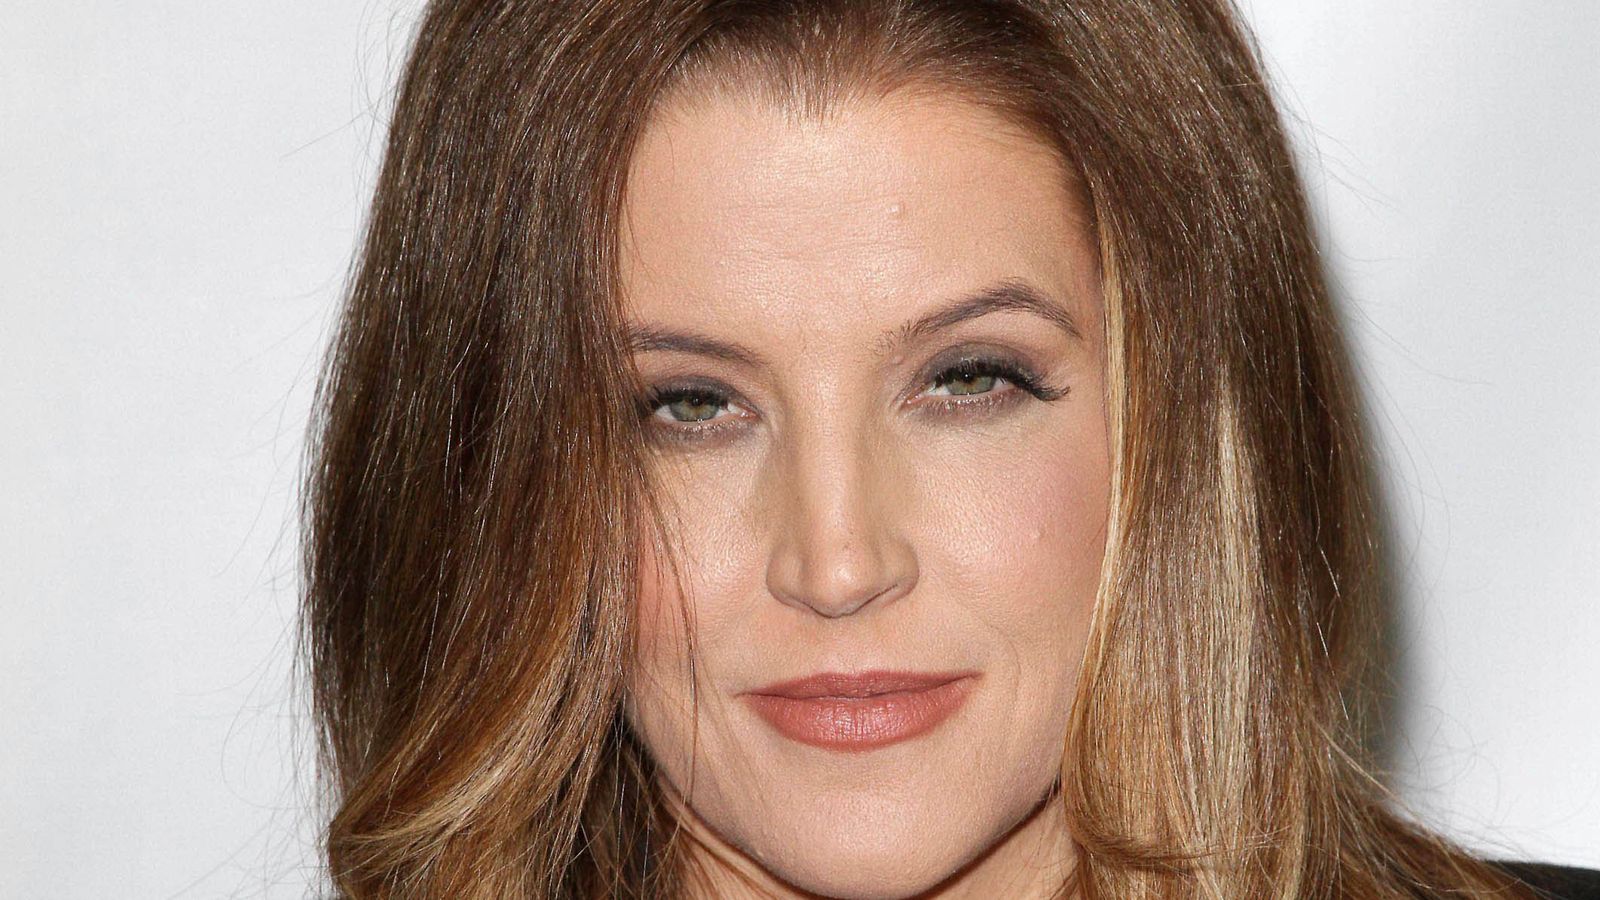 The tragic life of Lisa Marie Presley: How Elvis' only daughter suffered the early death of a parent, failed marriages and the grief of losing a son